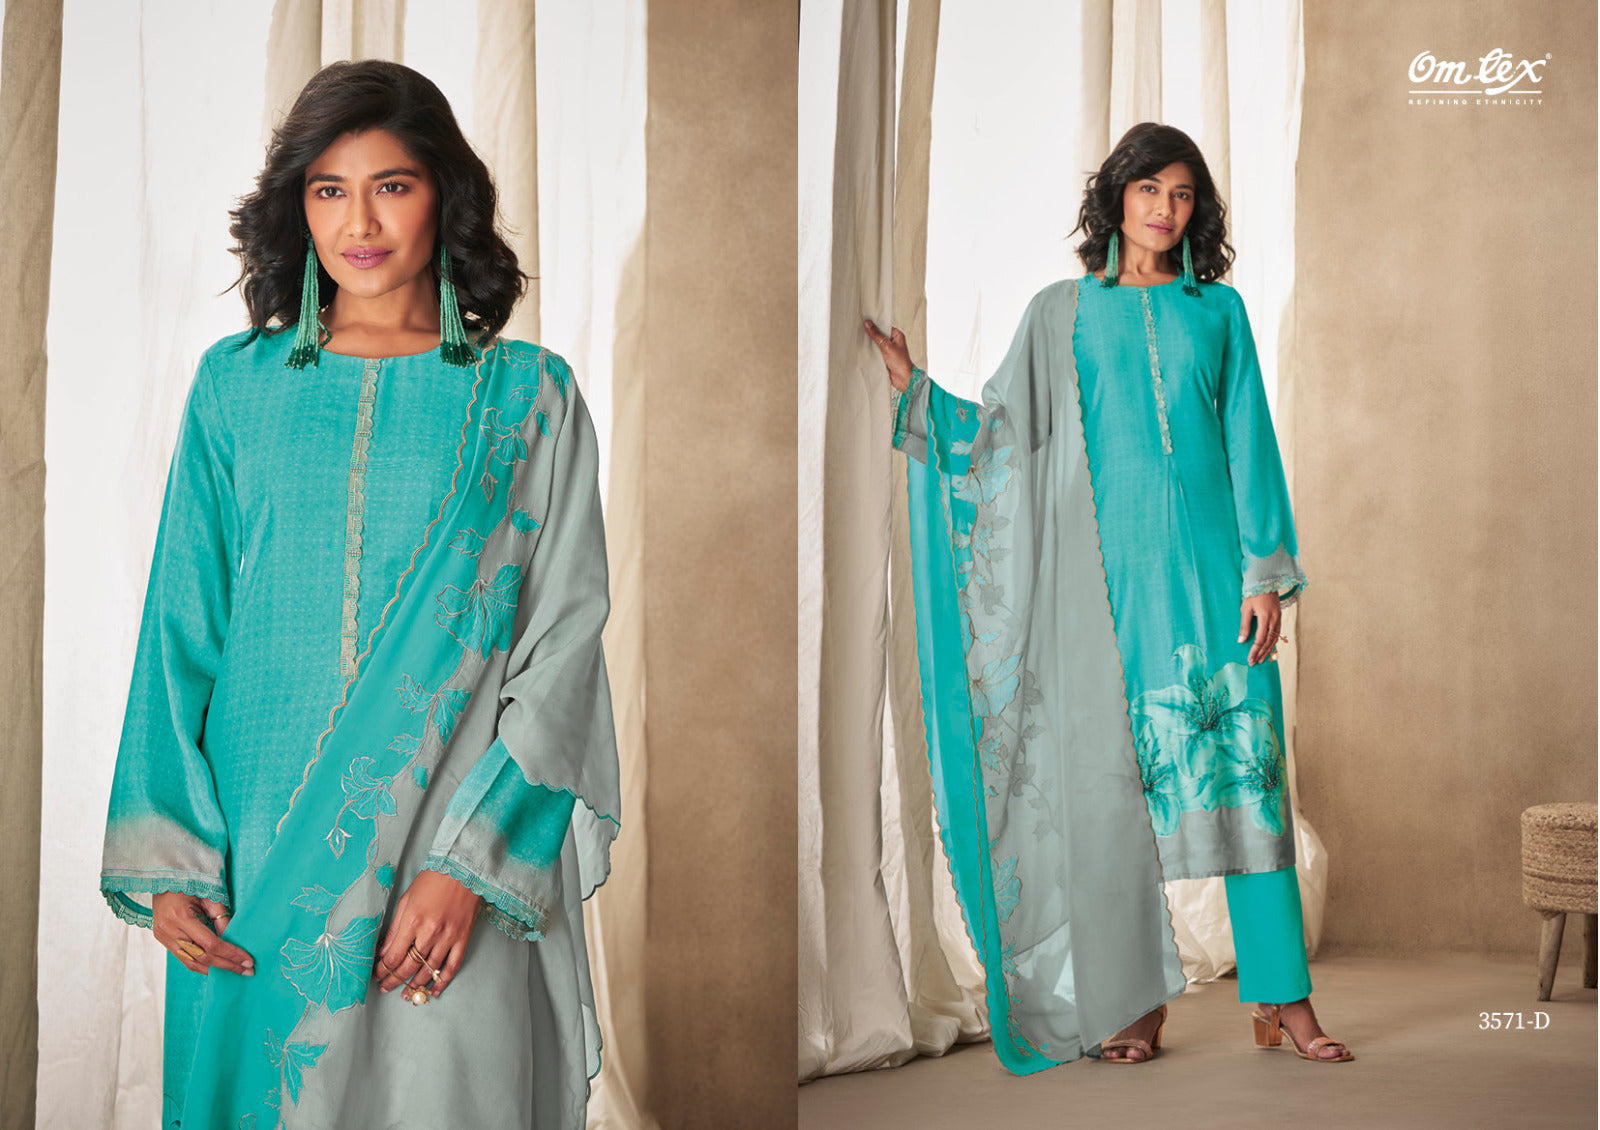 Mehaanshi Omtex Silk Pant Style Suits